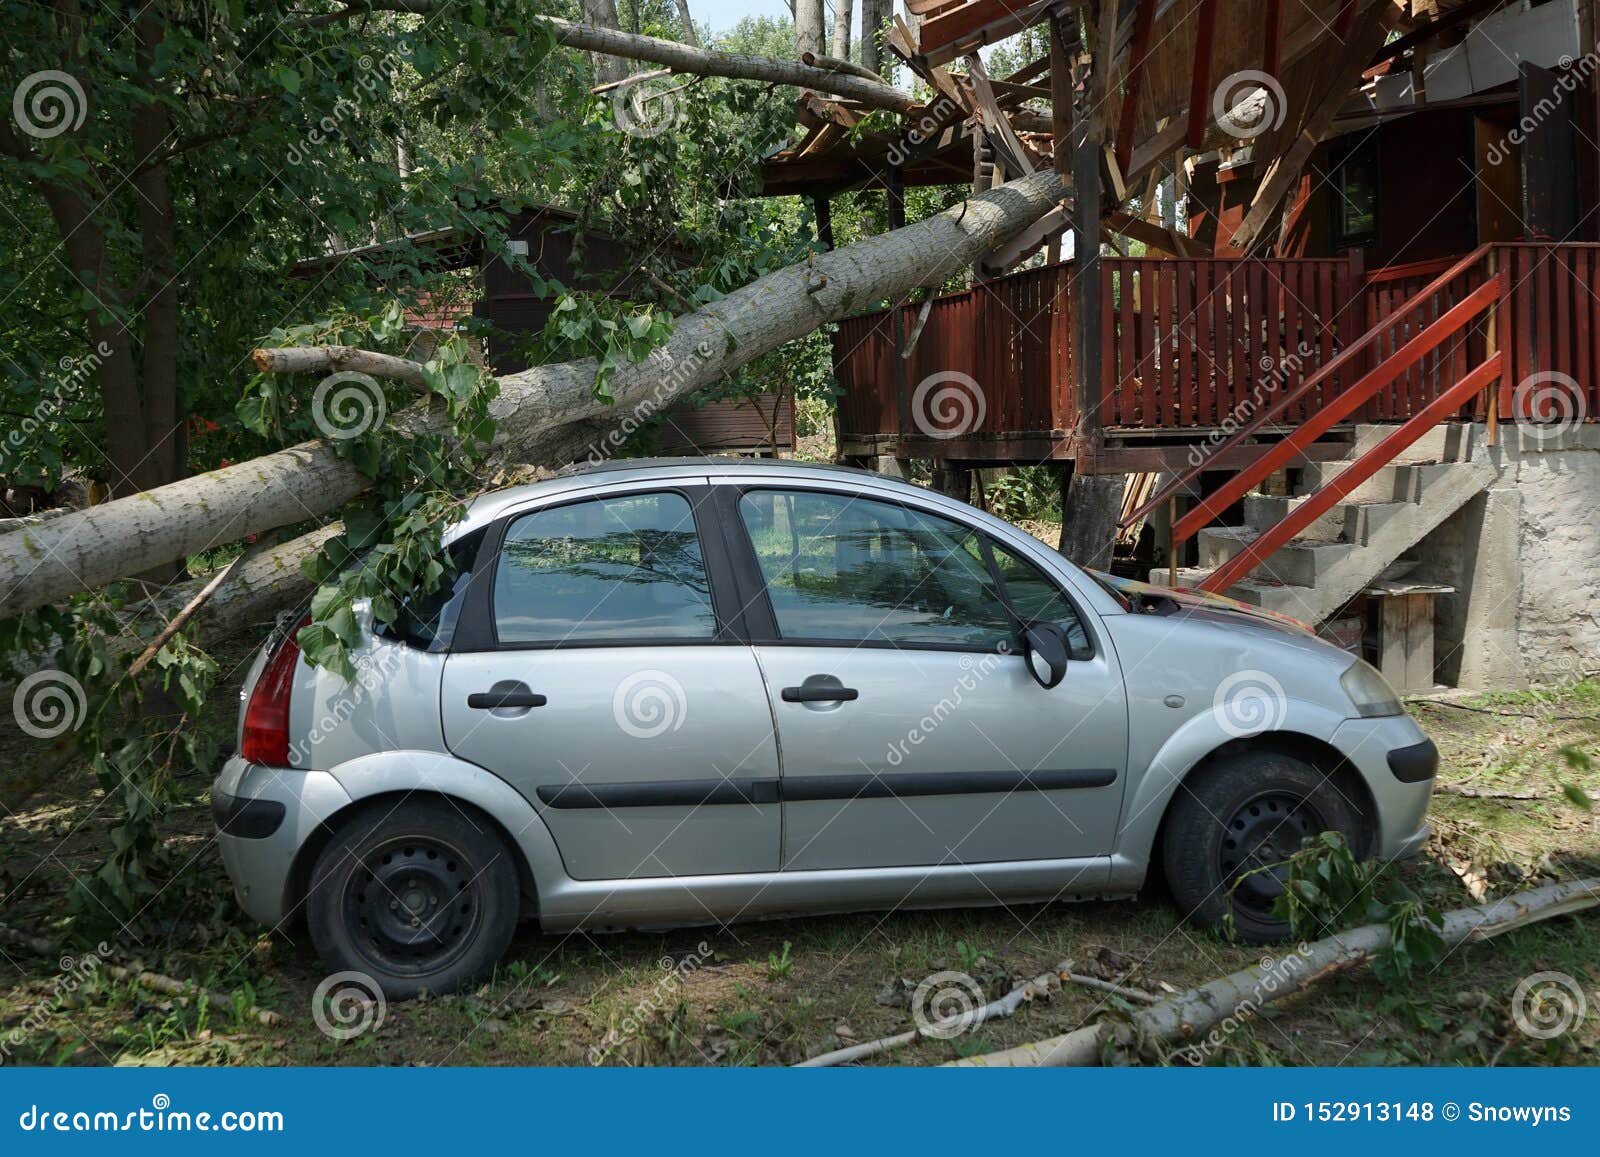 a car damaged by hurricane with fallen tree on the house and car